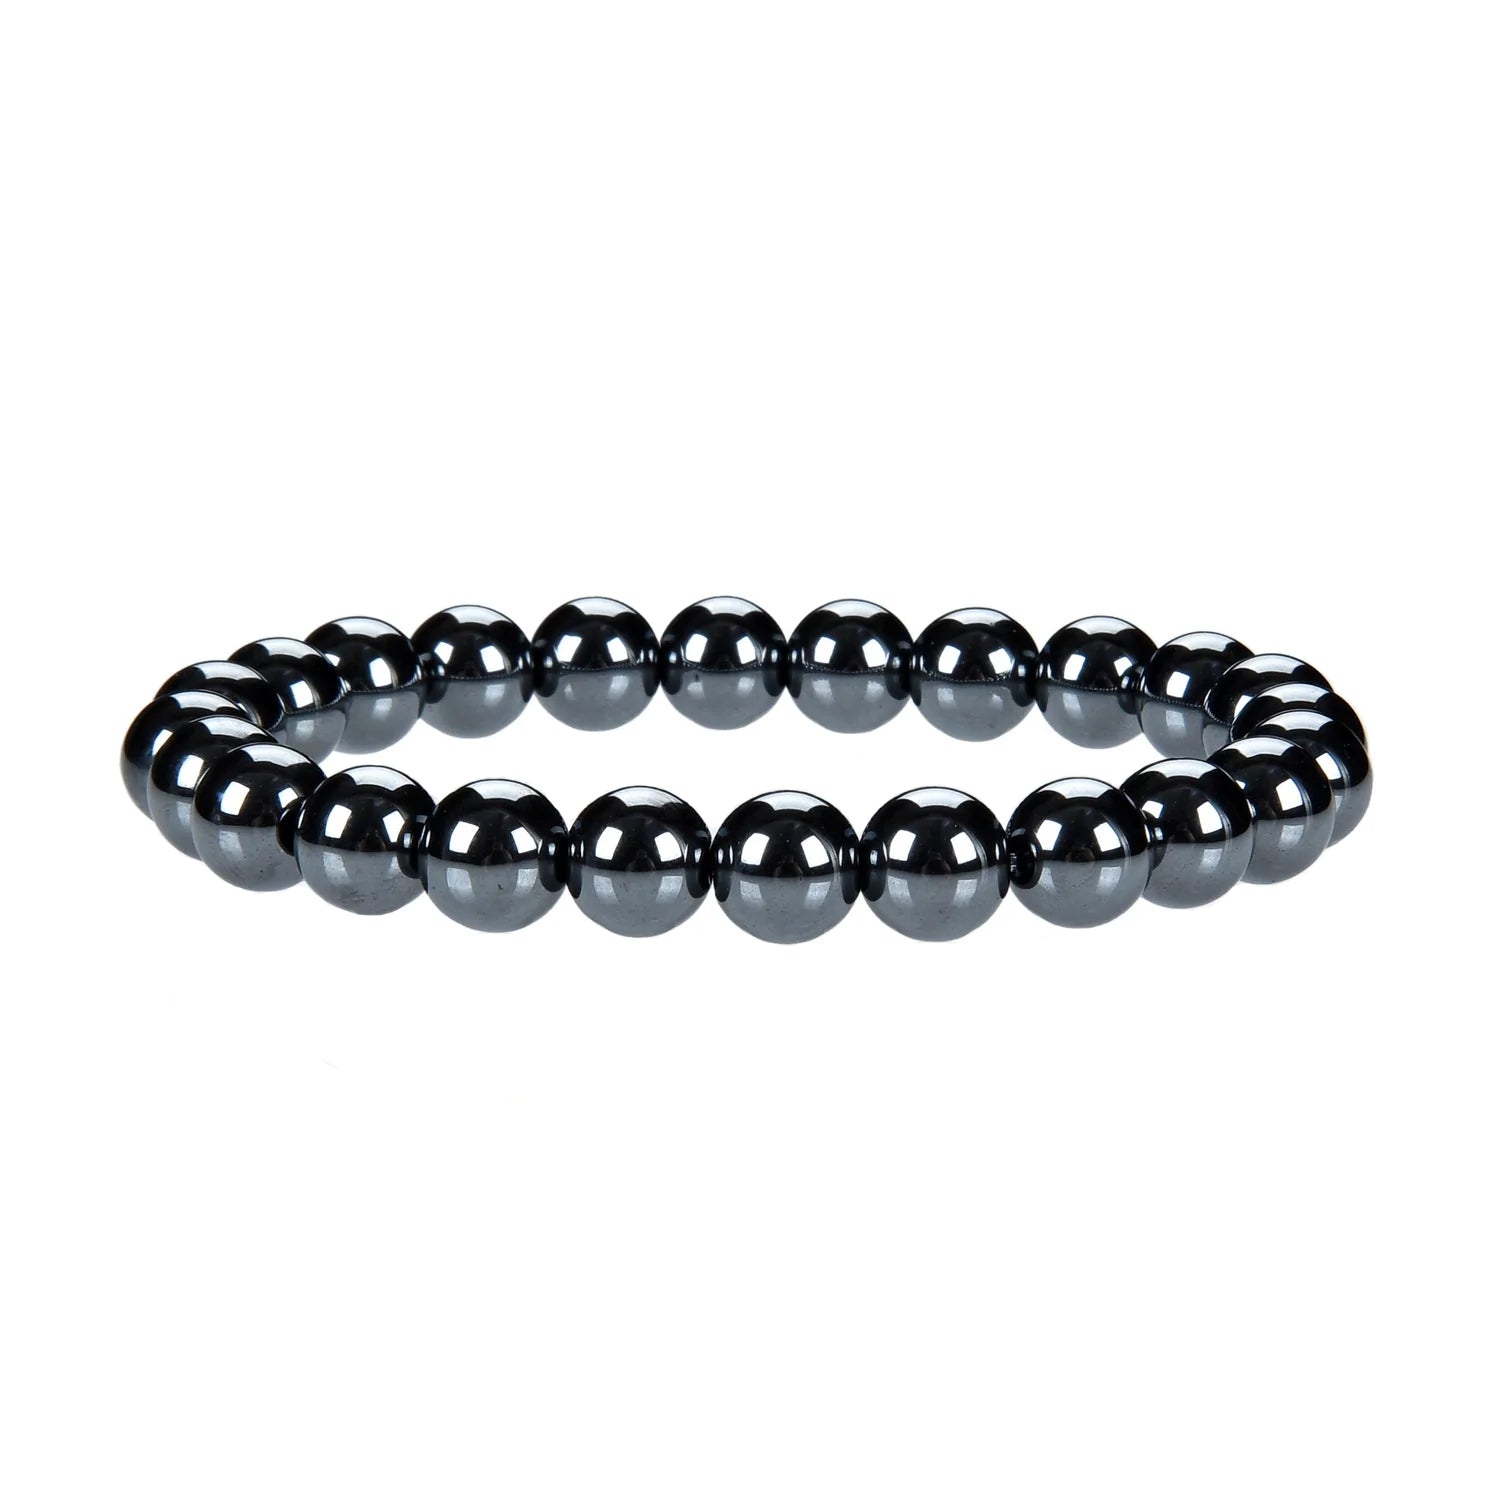 Dropship 8Pcs Hematite Stone Bracelet For Men Women Energy Magnetic Therapy  Anklet Stretchable Healthcare Weight Loss Reiki Healing Bangle Bracelets  Sets to Sell Online at a Lower Price | Doba